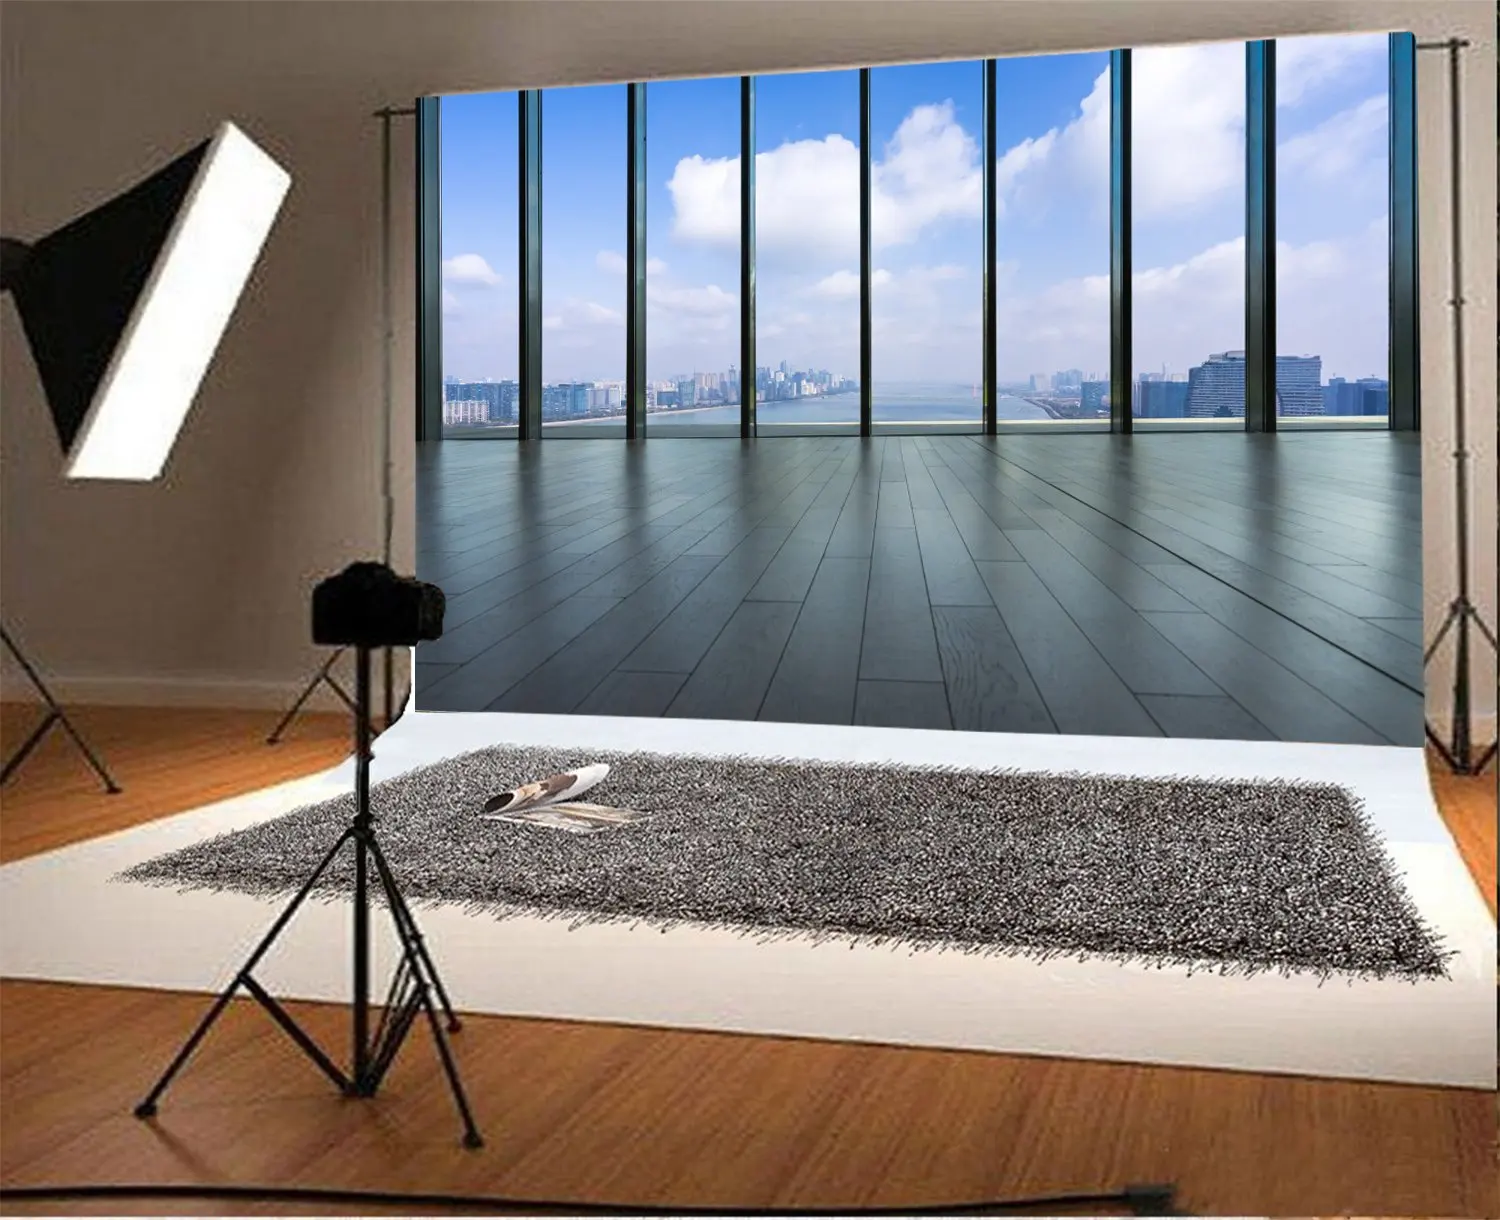 9X6FT Sea View Room Backdrop French Window Skyscraper Backdrops for Photography River New York Cityscape Blue Sky Shabby Wood Floor Interior Vinyl Photo Background Bride Lover Studio Props 